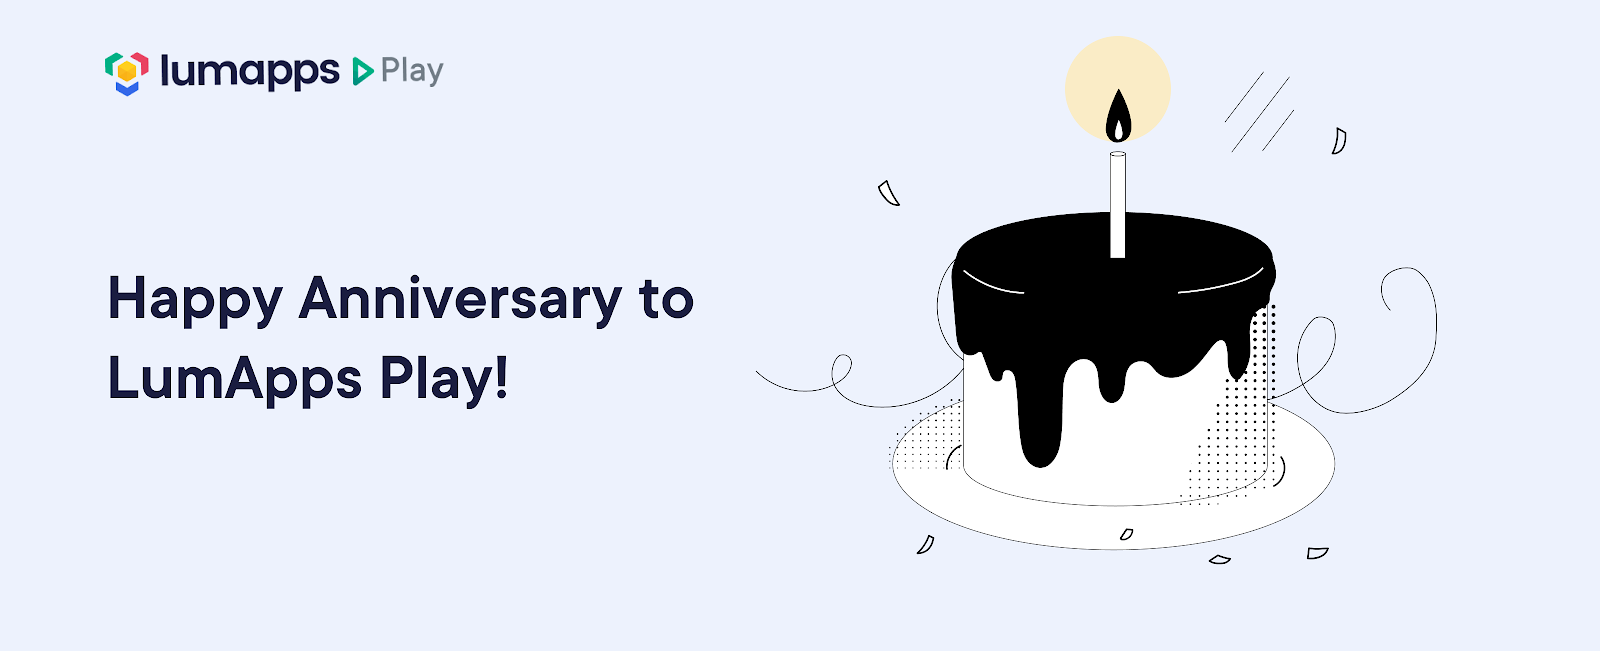 LumApps Play turns one: Celebrating a year of streamlined video management in large organizations